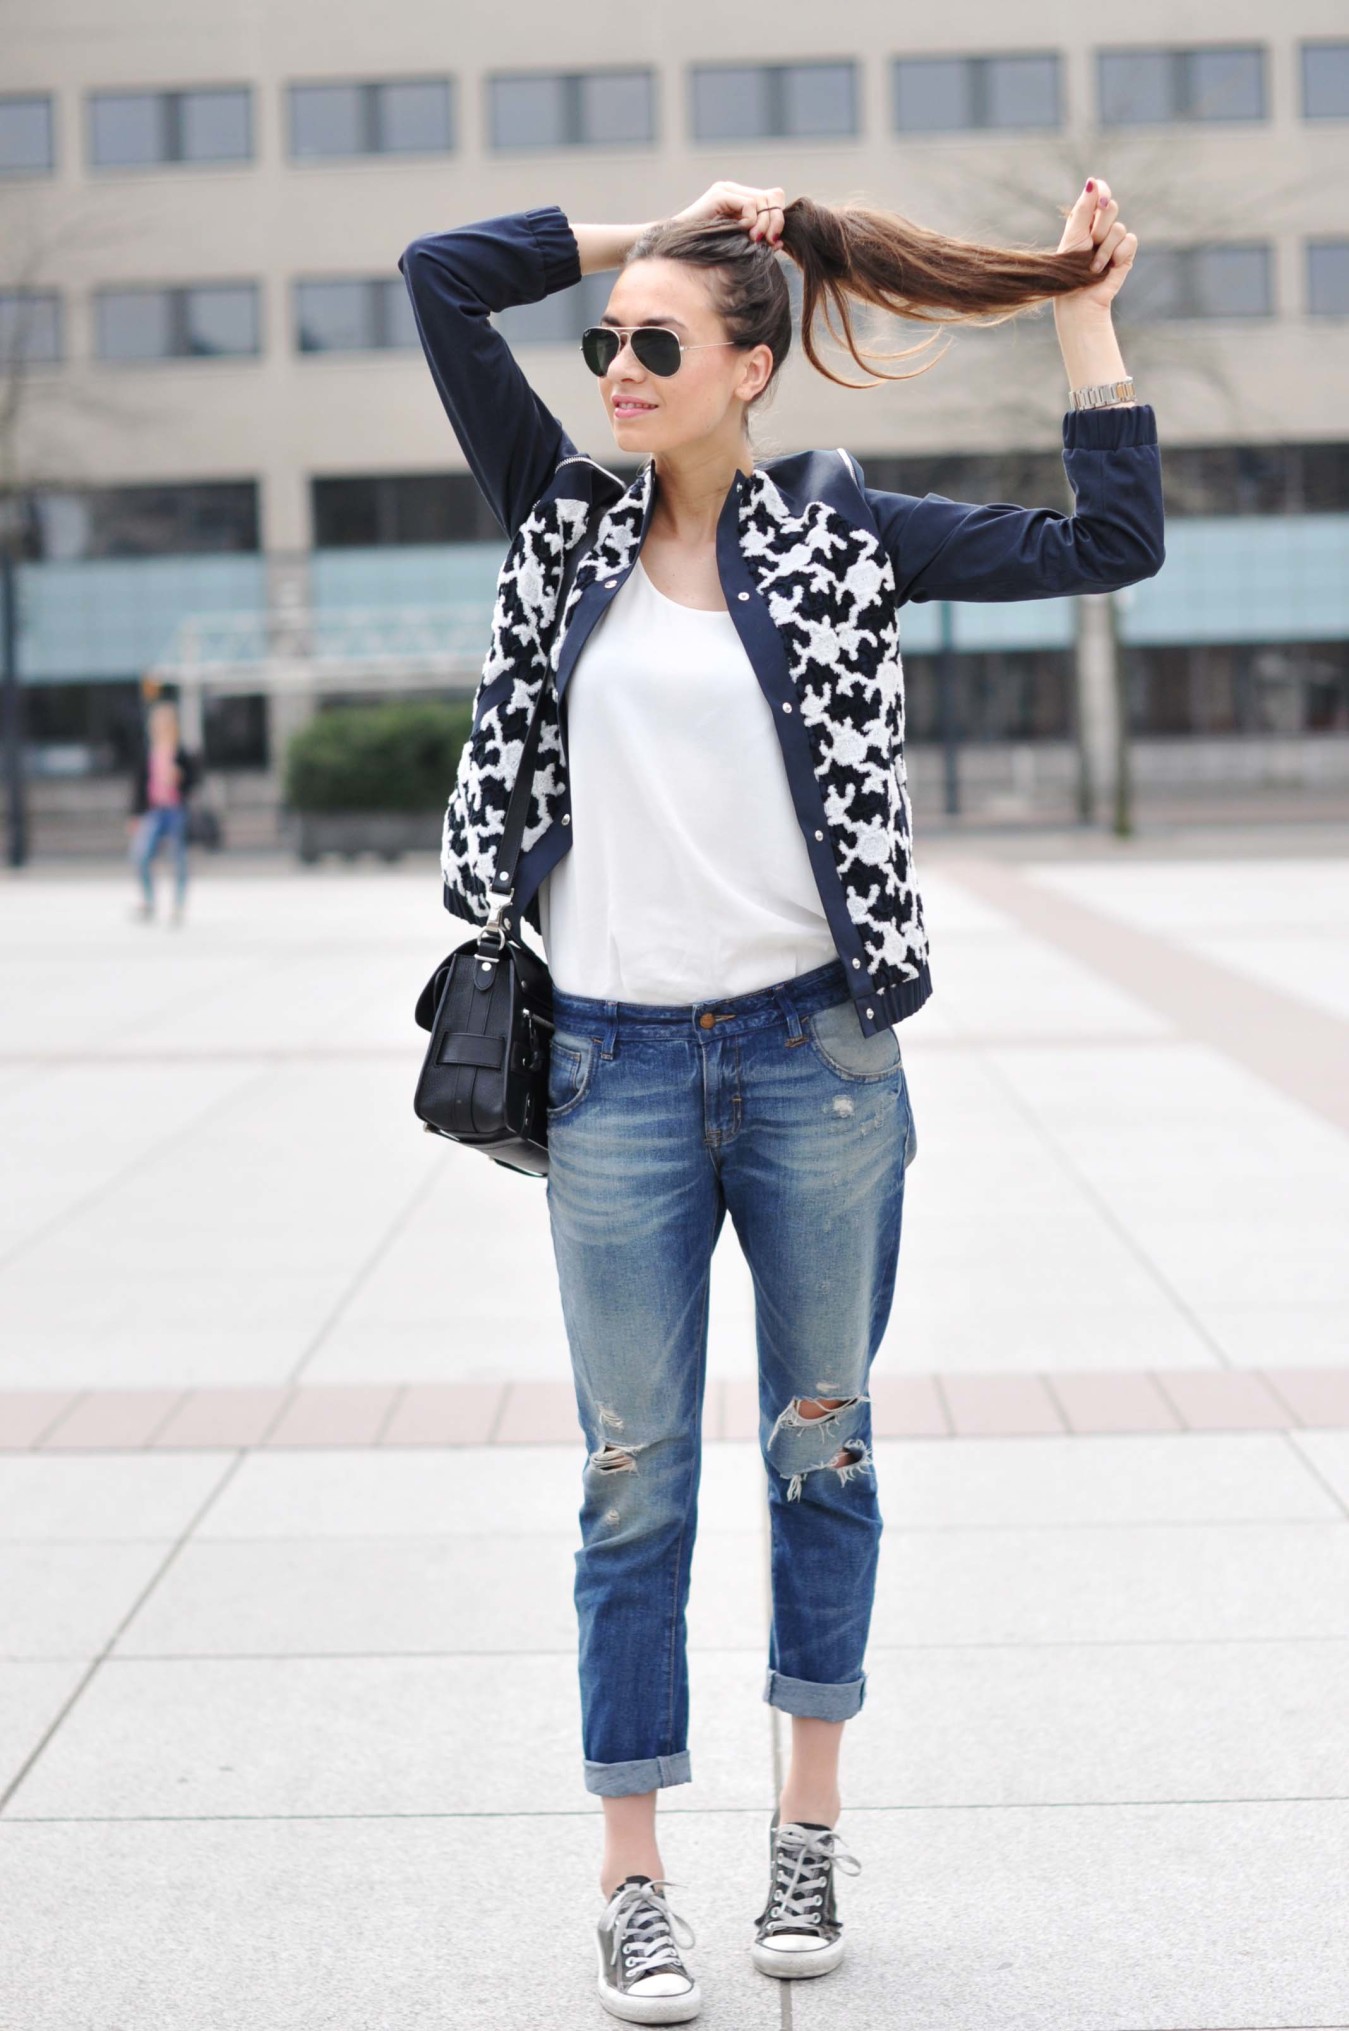 Cute-Girly-Outfits-With-Ripped-Jeans-Plus-Sneakers-and-Printed-Blazer-Plus-Sun-Glasses